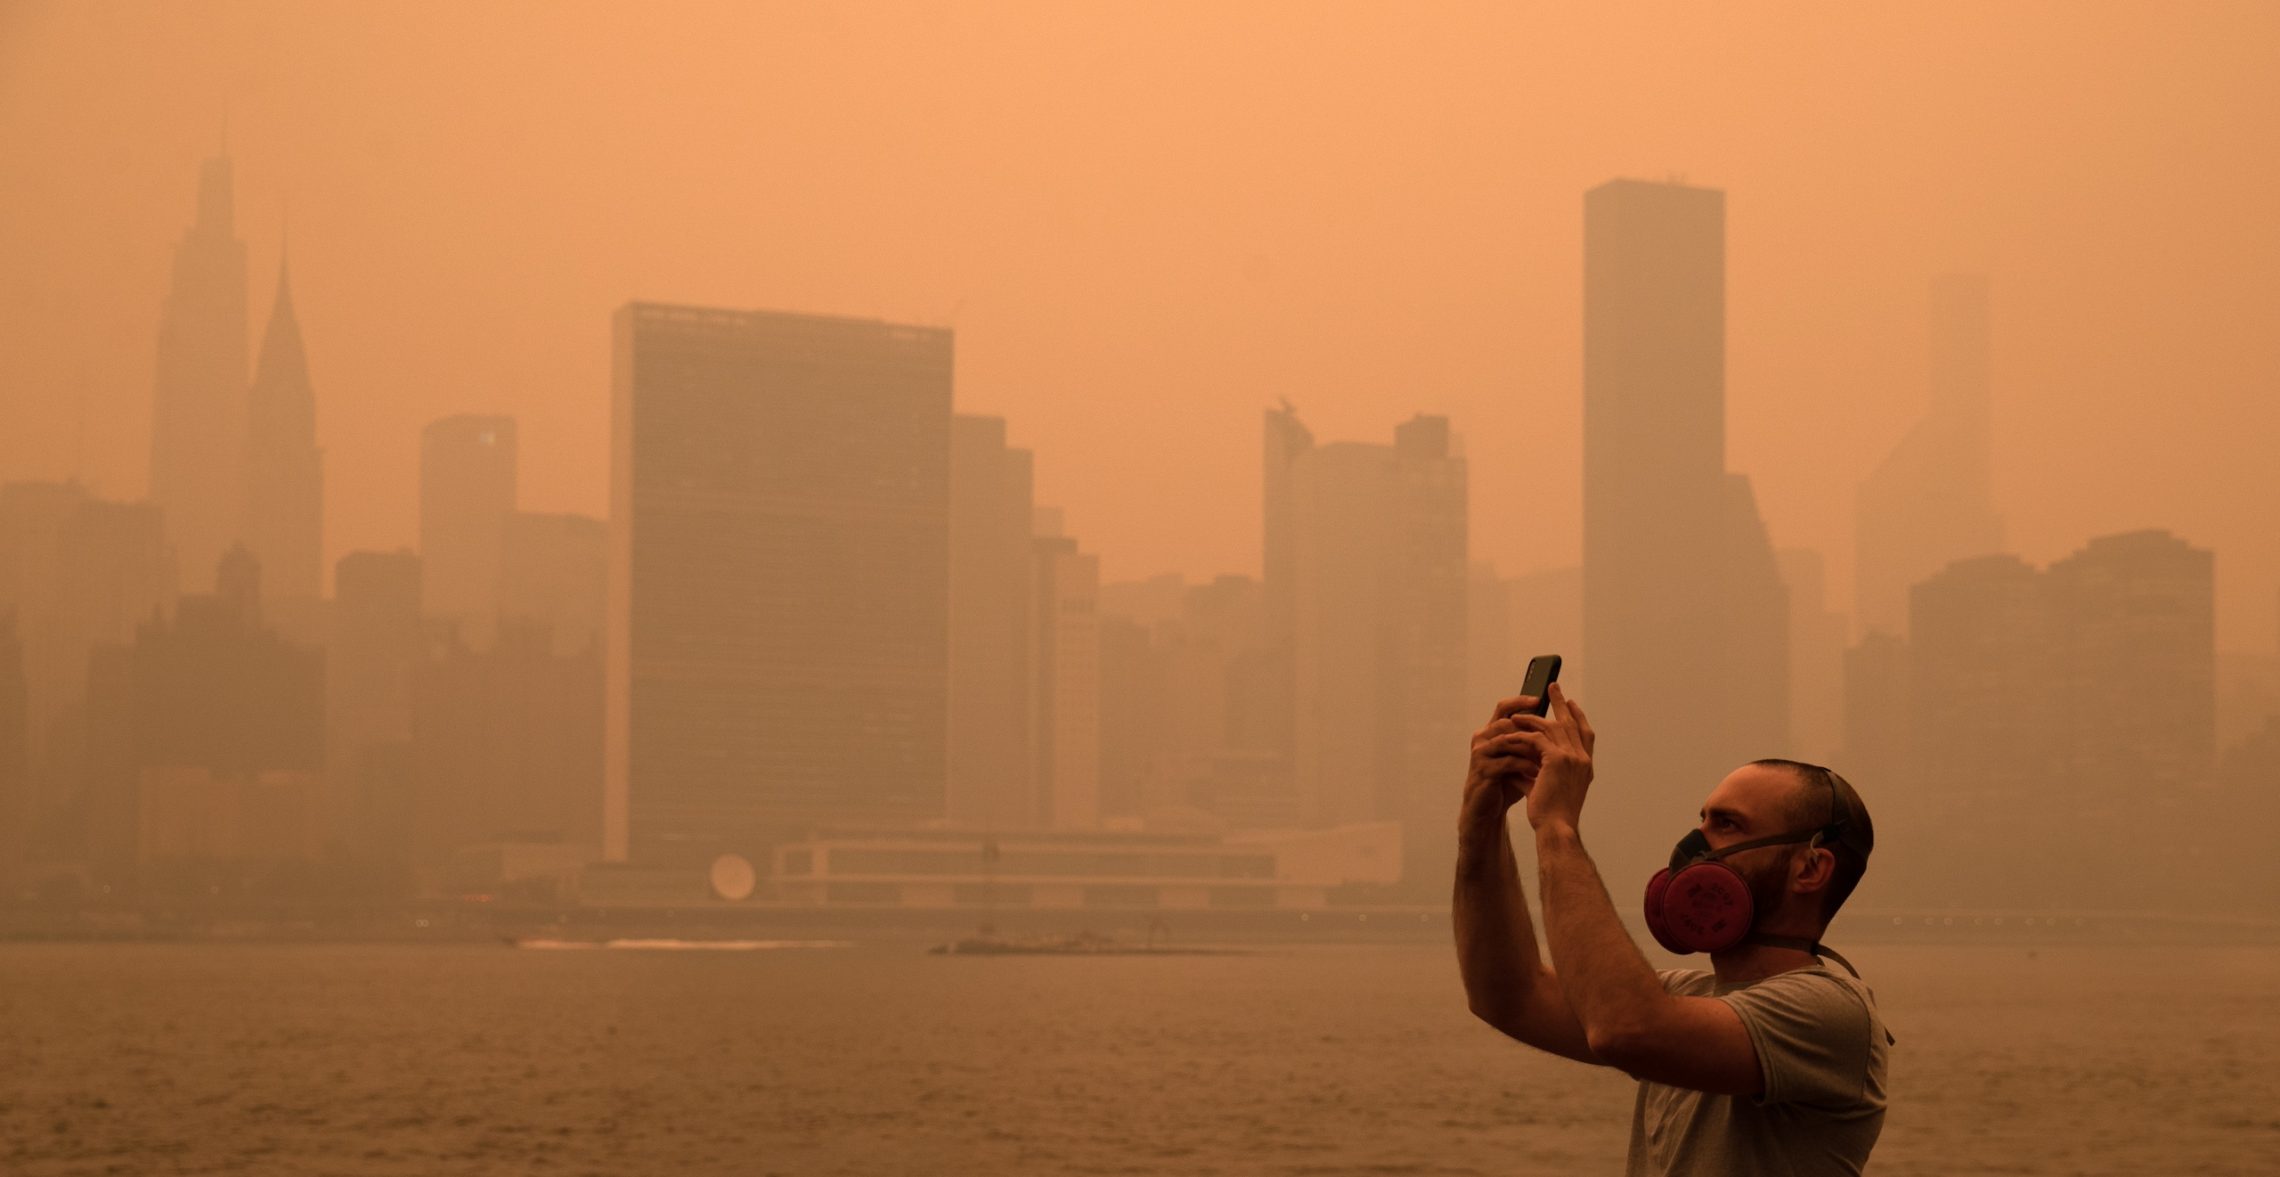 6/7/23 The New York City Manhattan skyline as seen from the East River in Long Island City covered in haze and smoke caused by wildfires in Canada. Brian Zak/NY Post